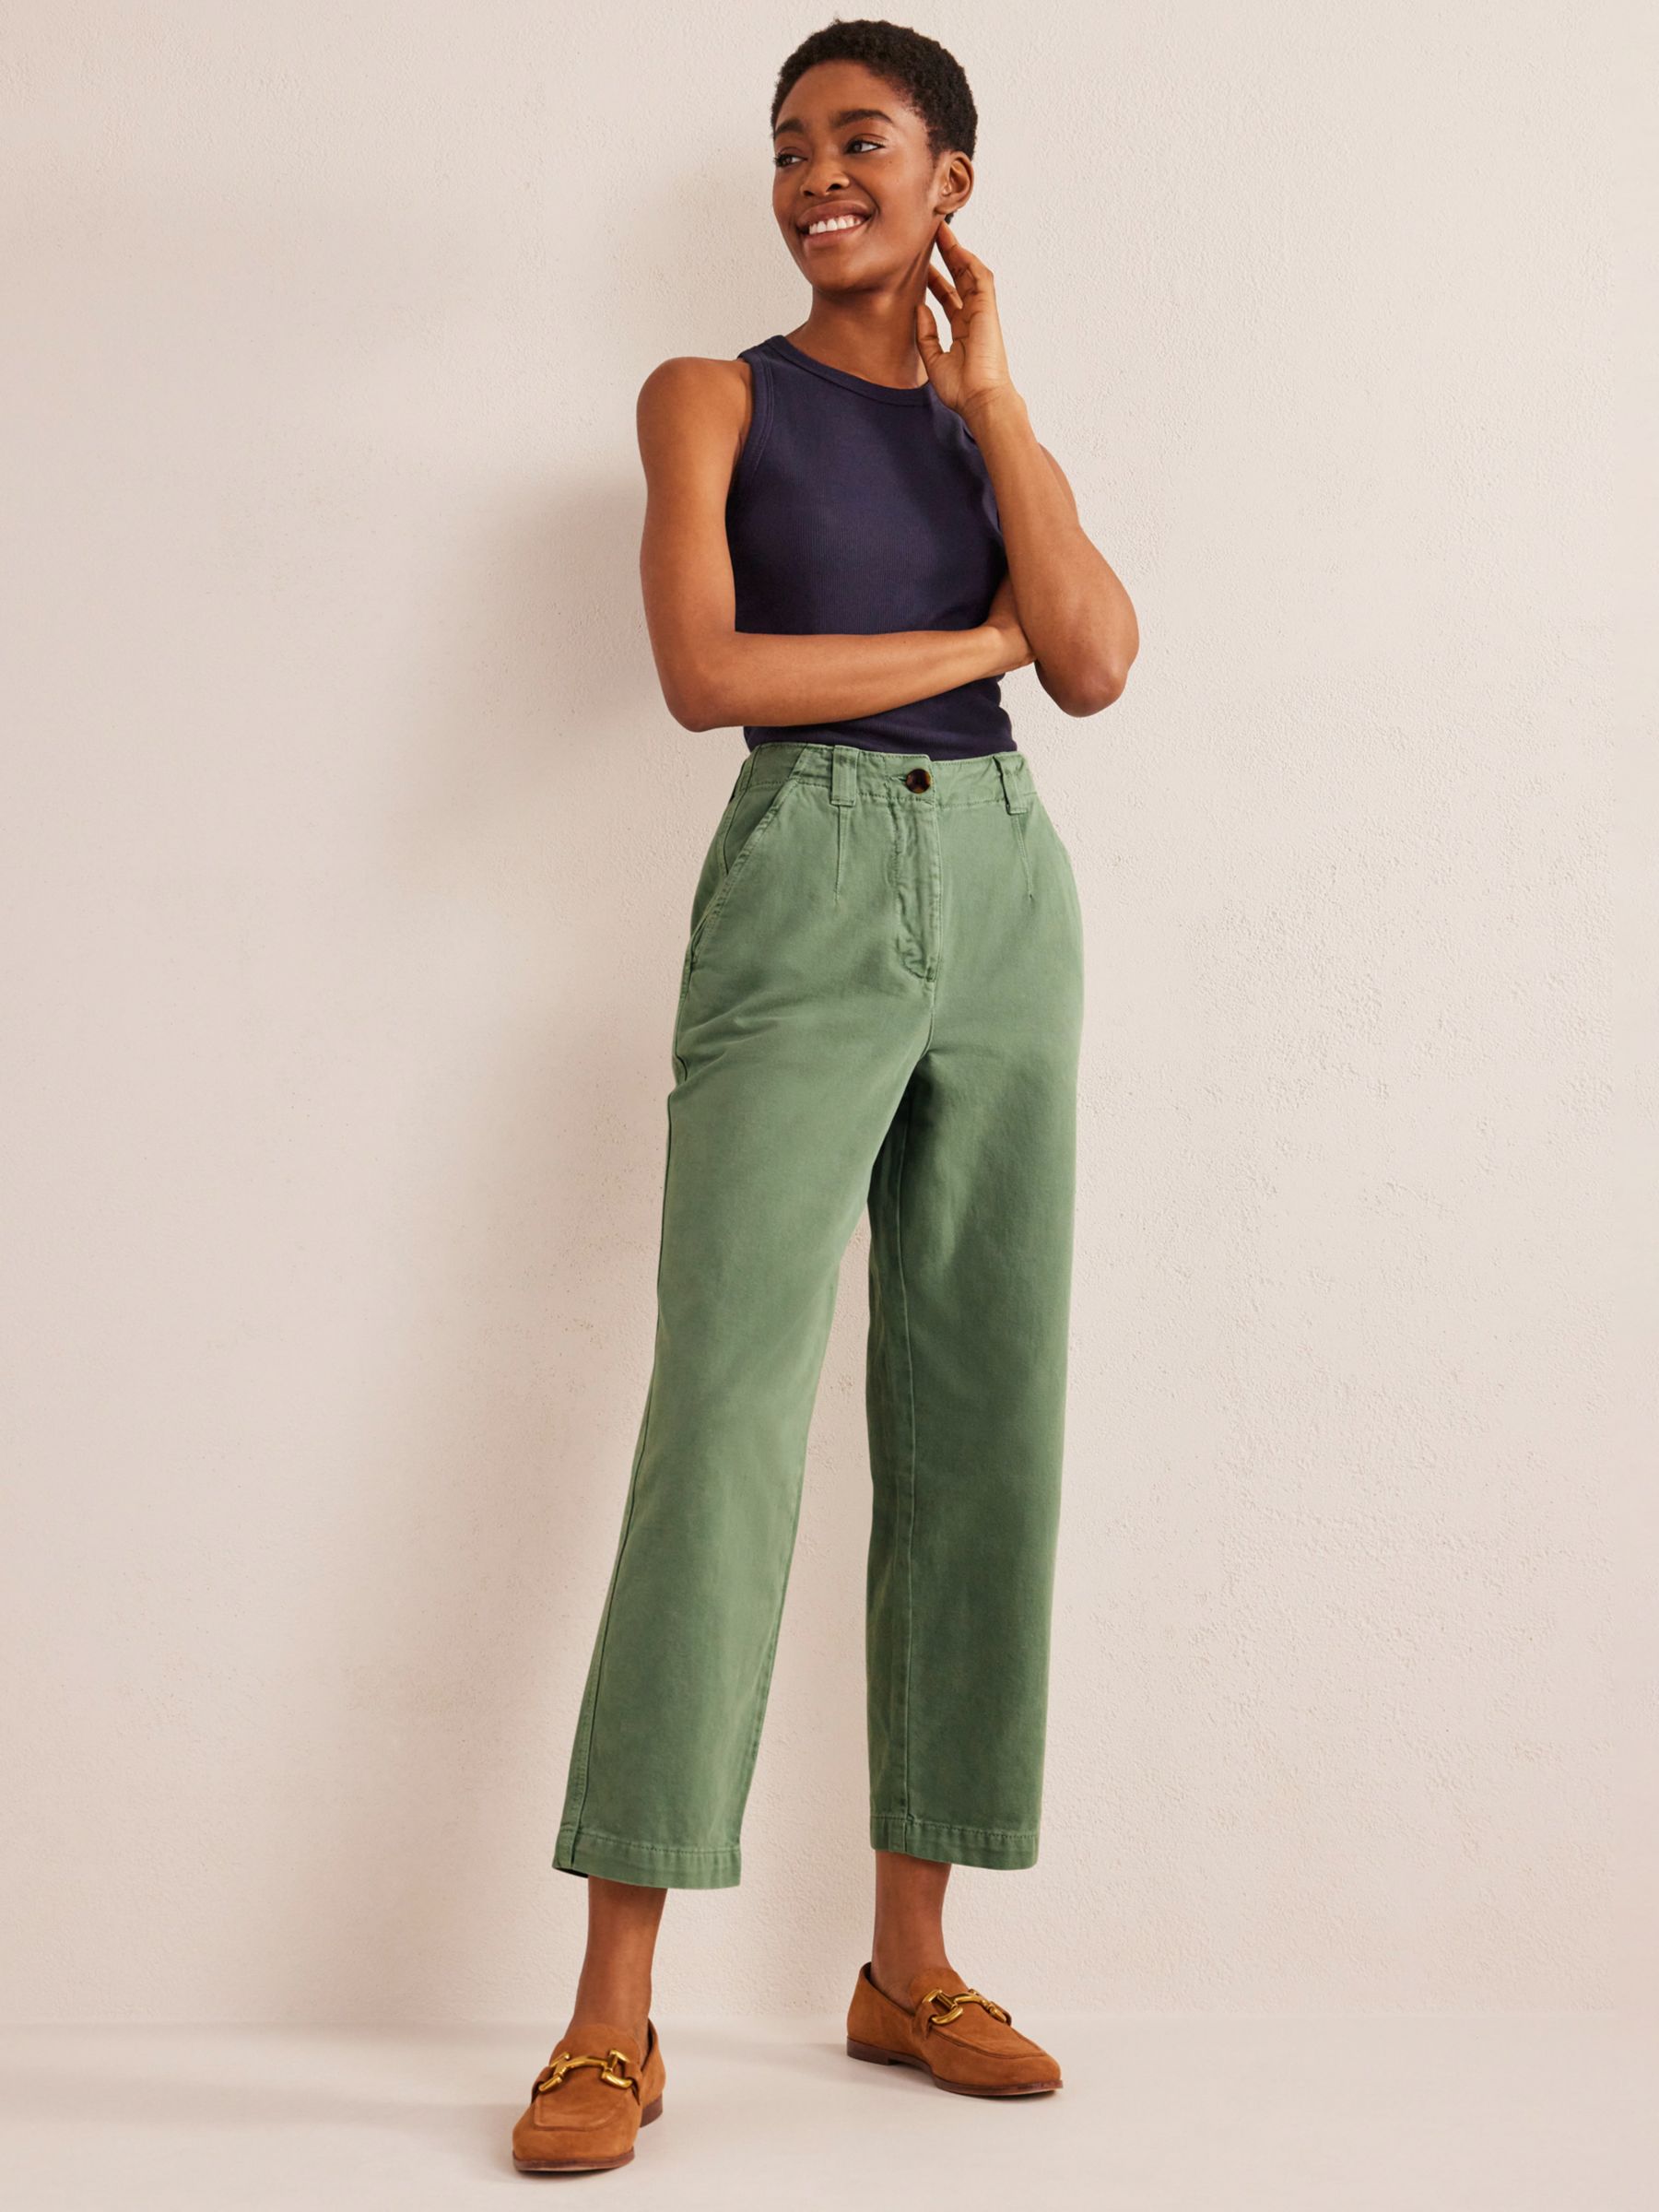 Boden Everyday Soft Cropped Trousers, Seaspray, 8